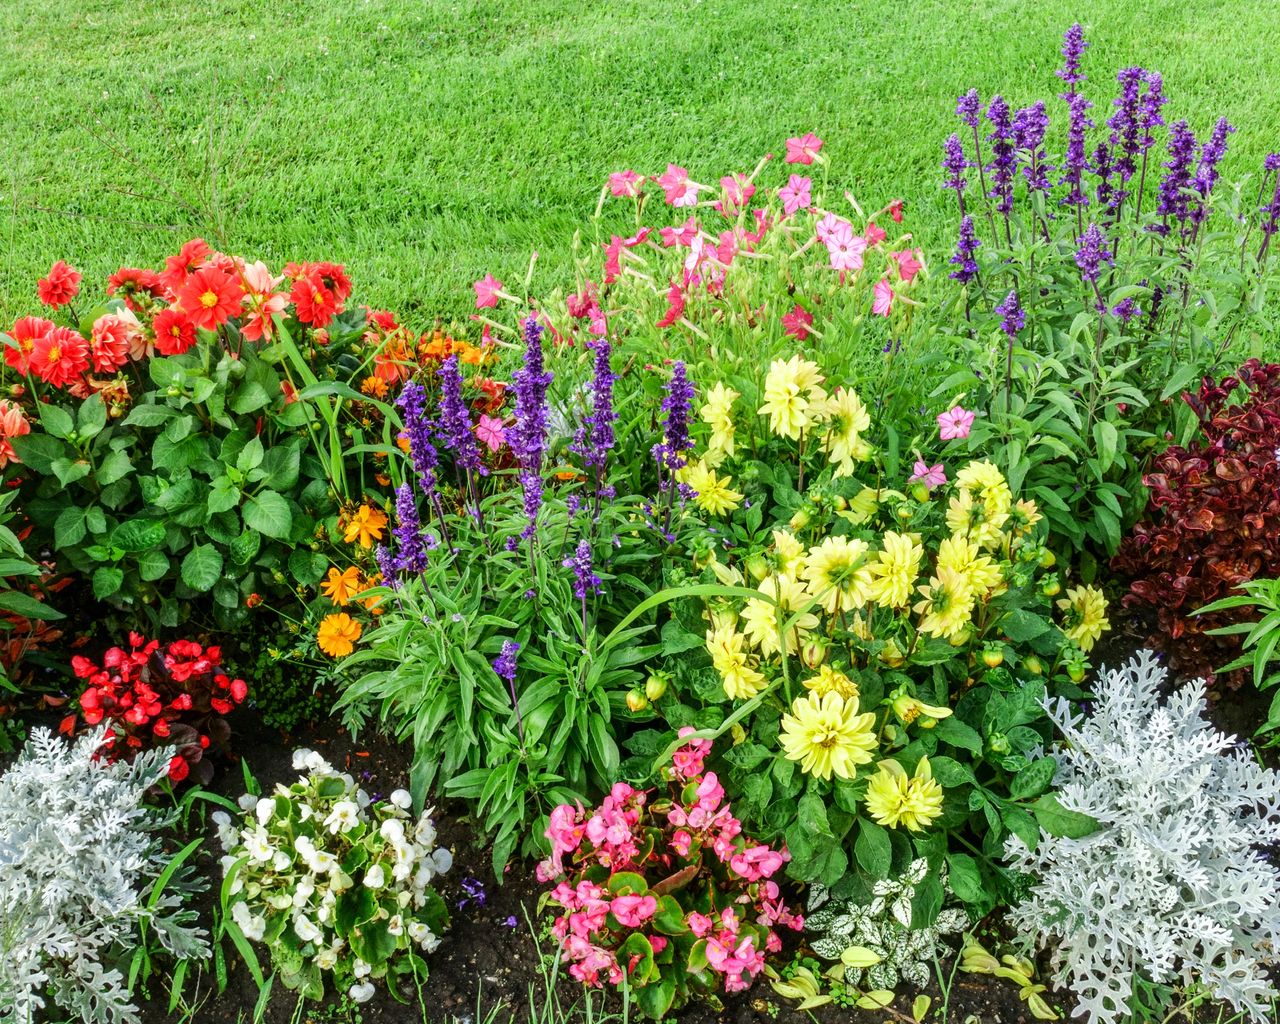 Are bedding annuals sustainable? Andy Sturgeon gives an expert view ...